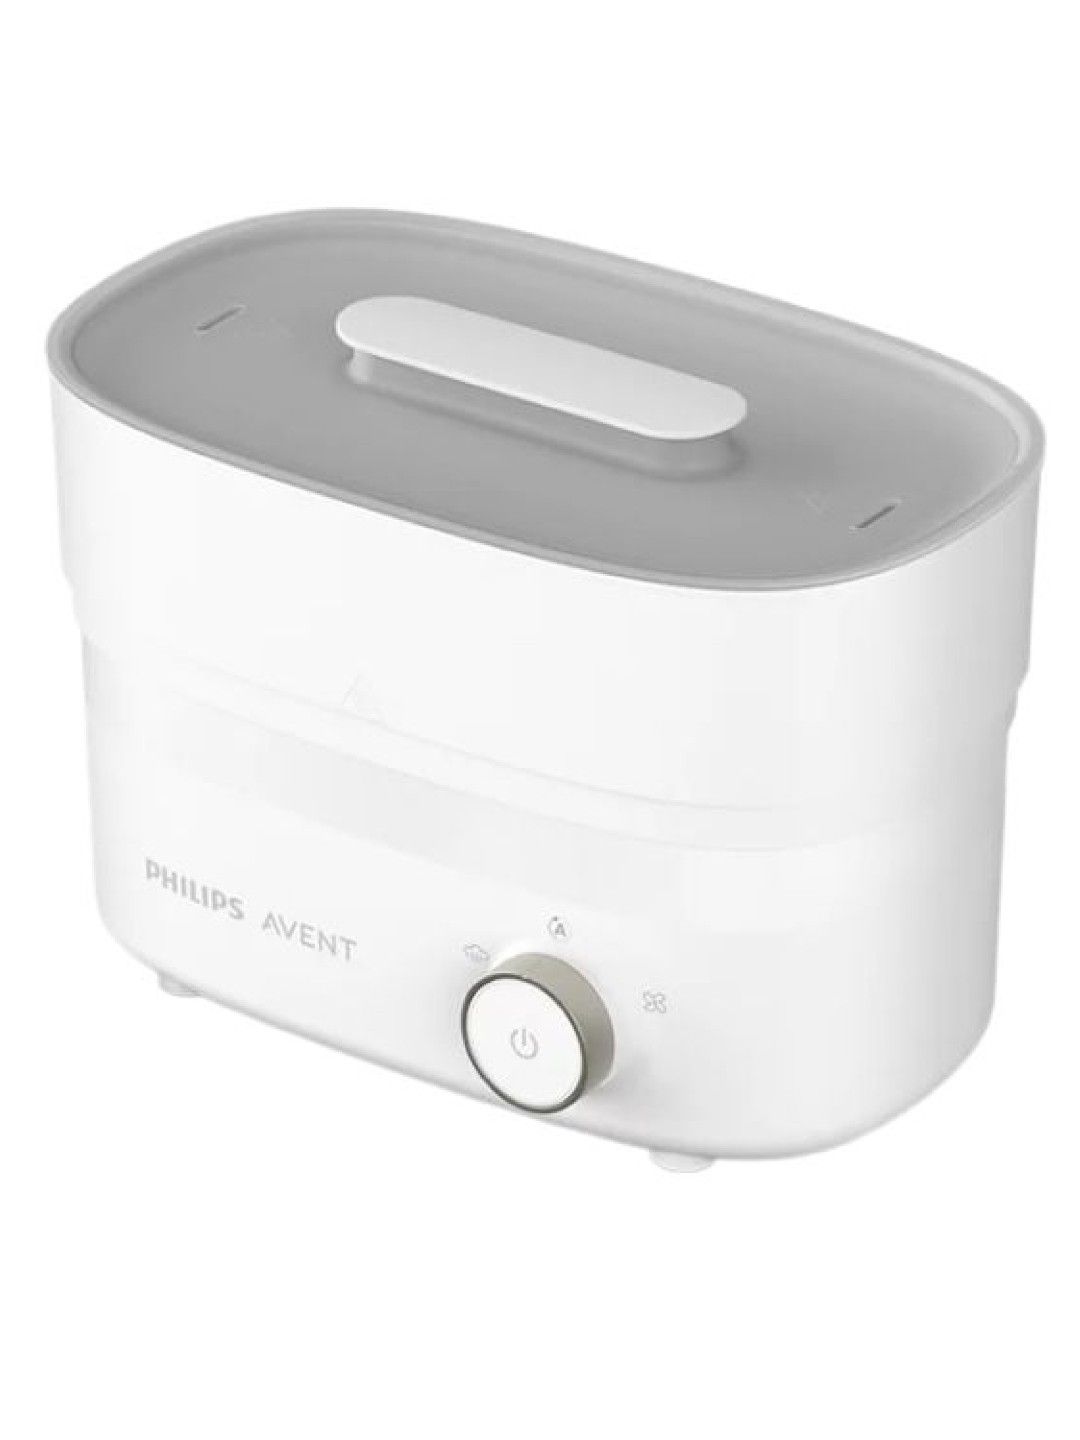 Avent Philips Avent Premium Electric Steam Sterilizer With Dryer